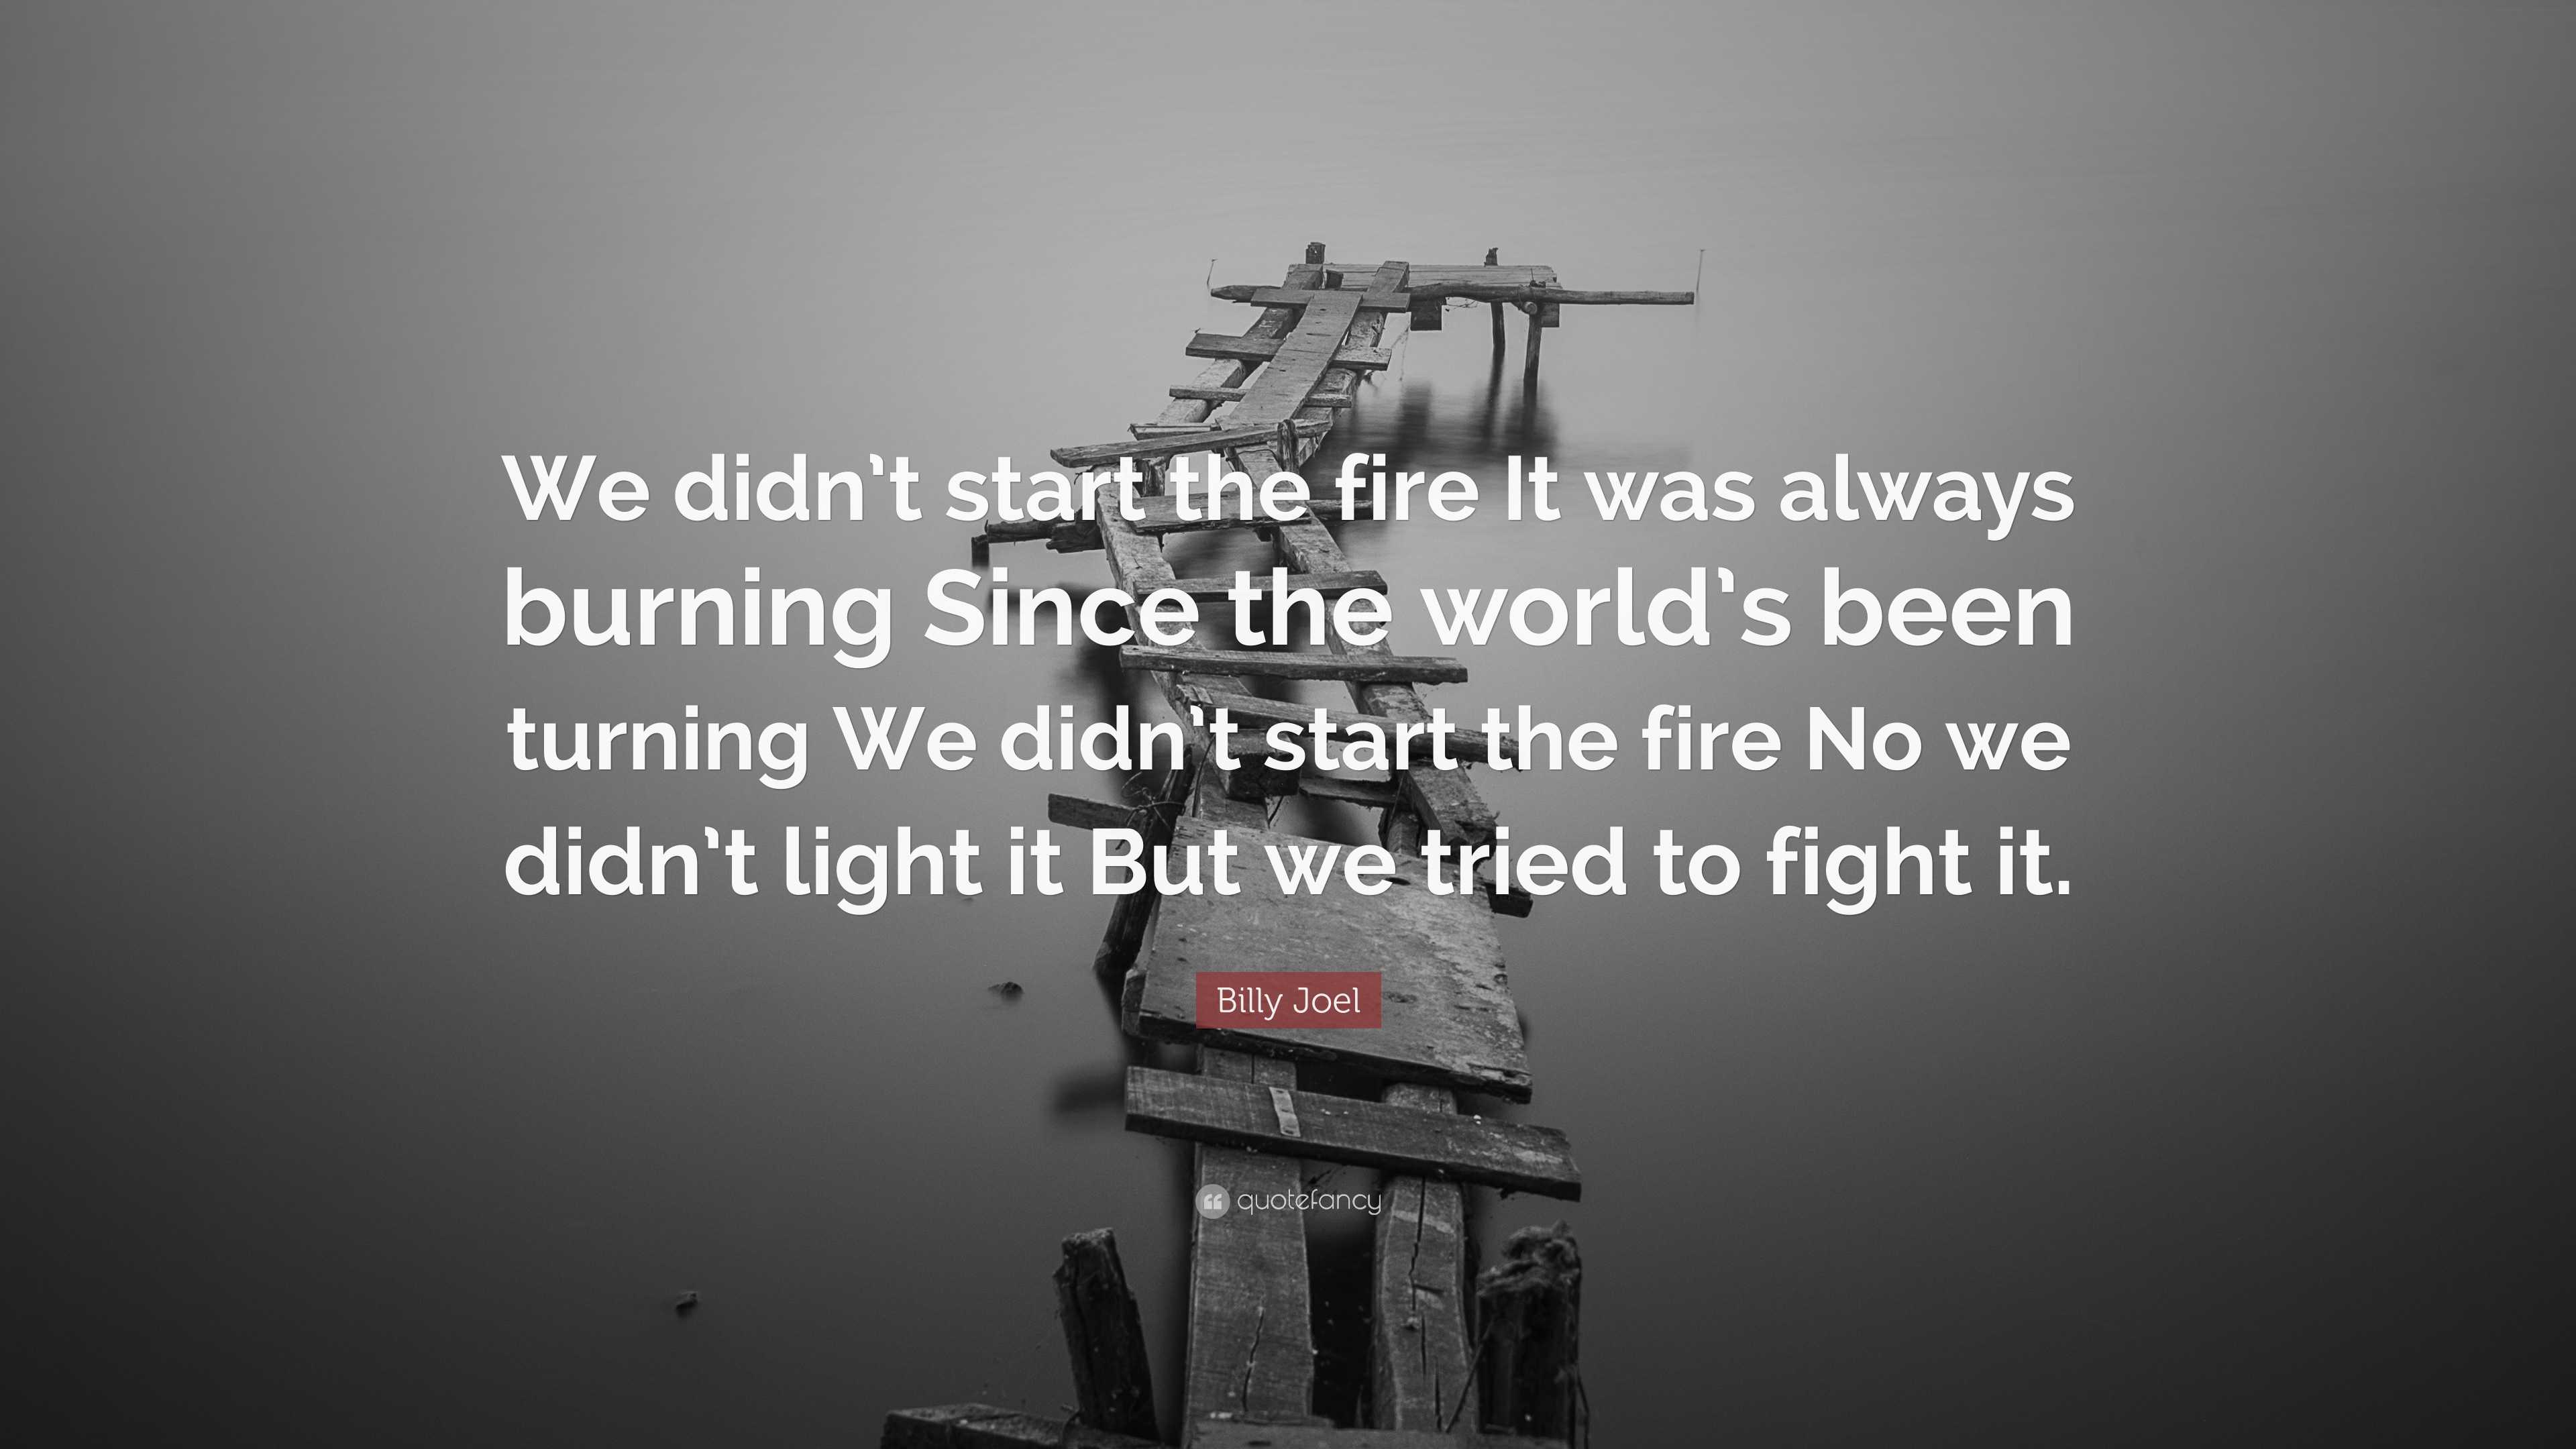 Billy Joel Quote: “We didn’t start the fire It was always burning Since ...